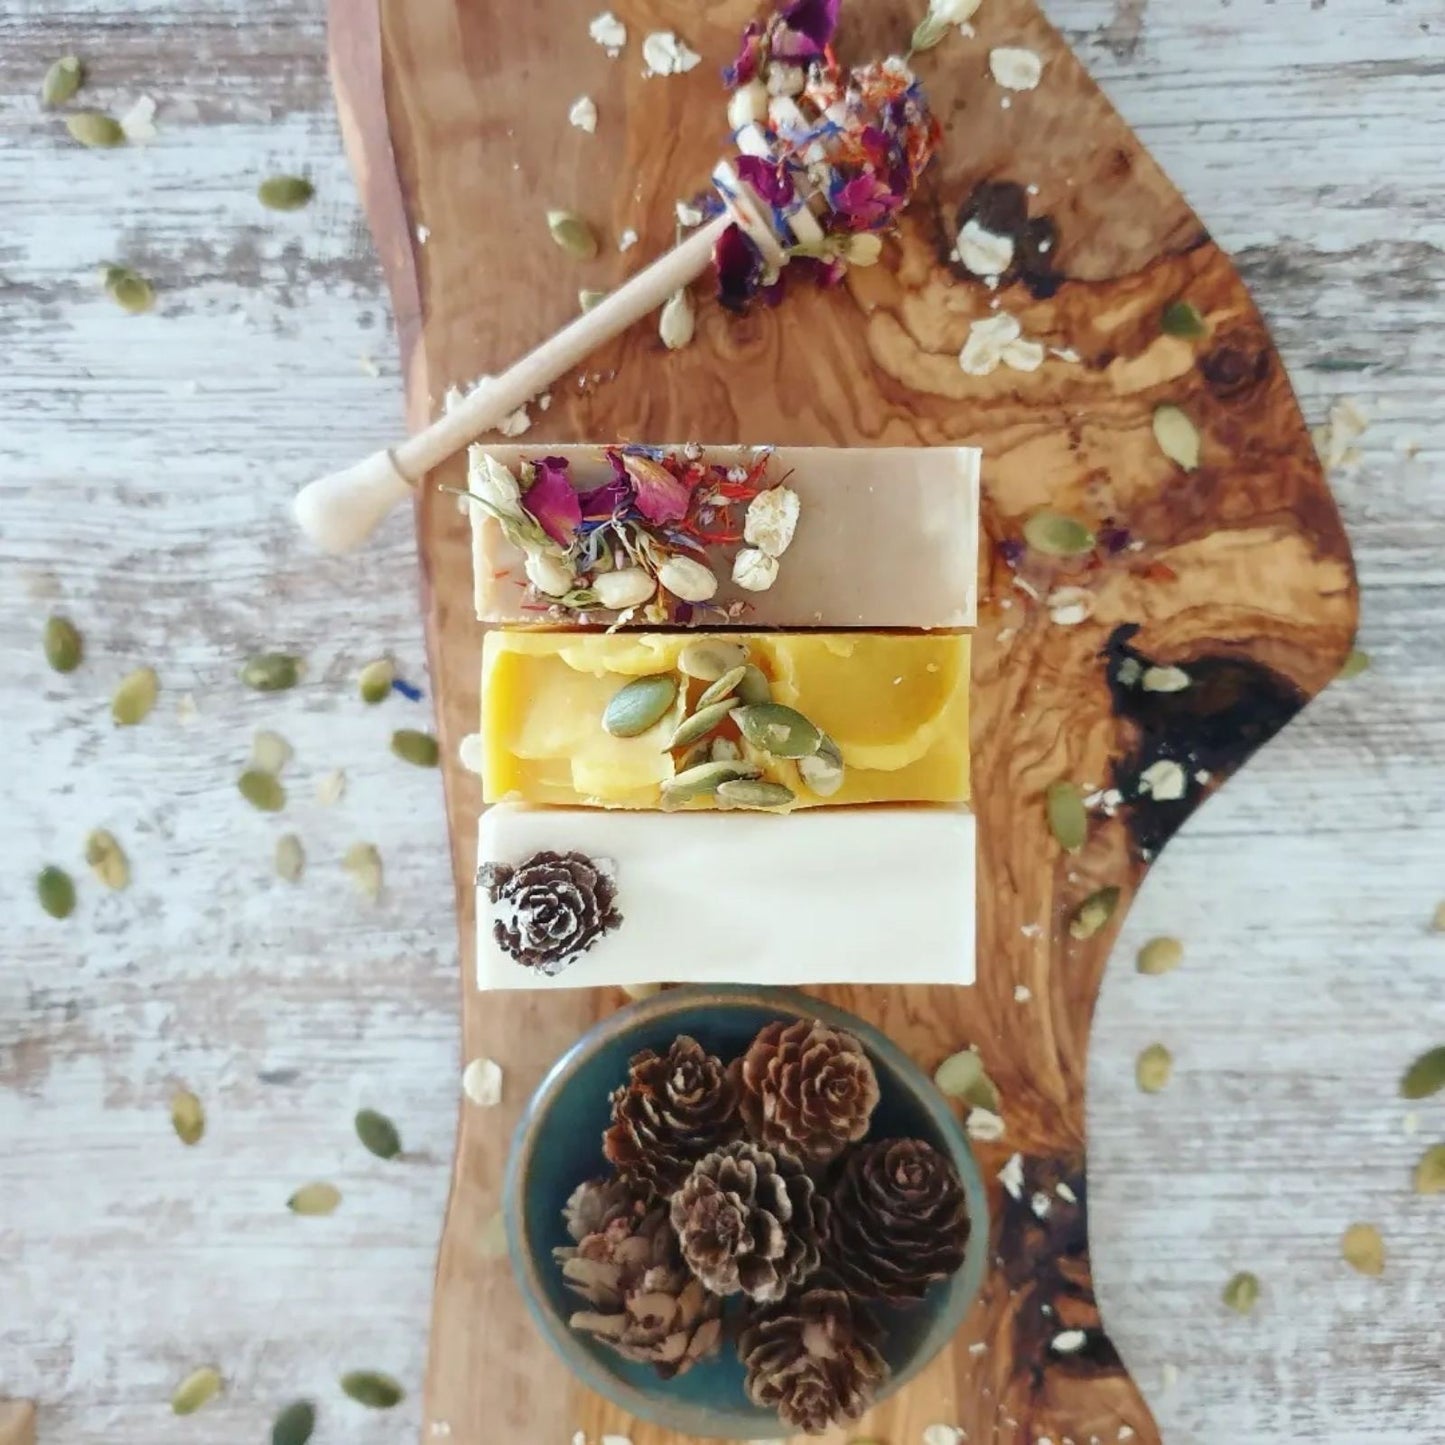 Winter Woods Soap, Cinnamon Spa Soap, and Honey & Oat Soap, lined up against one another, surrounded by pinecones, oats, and pumpkin seeds to represent The Eden Collections winter and autumn range.